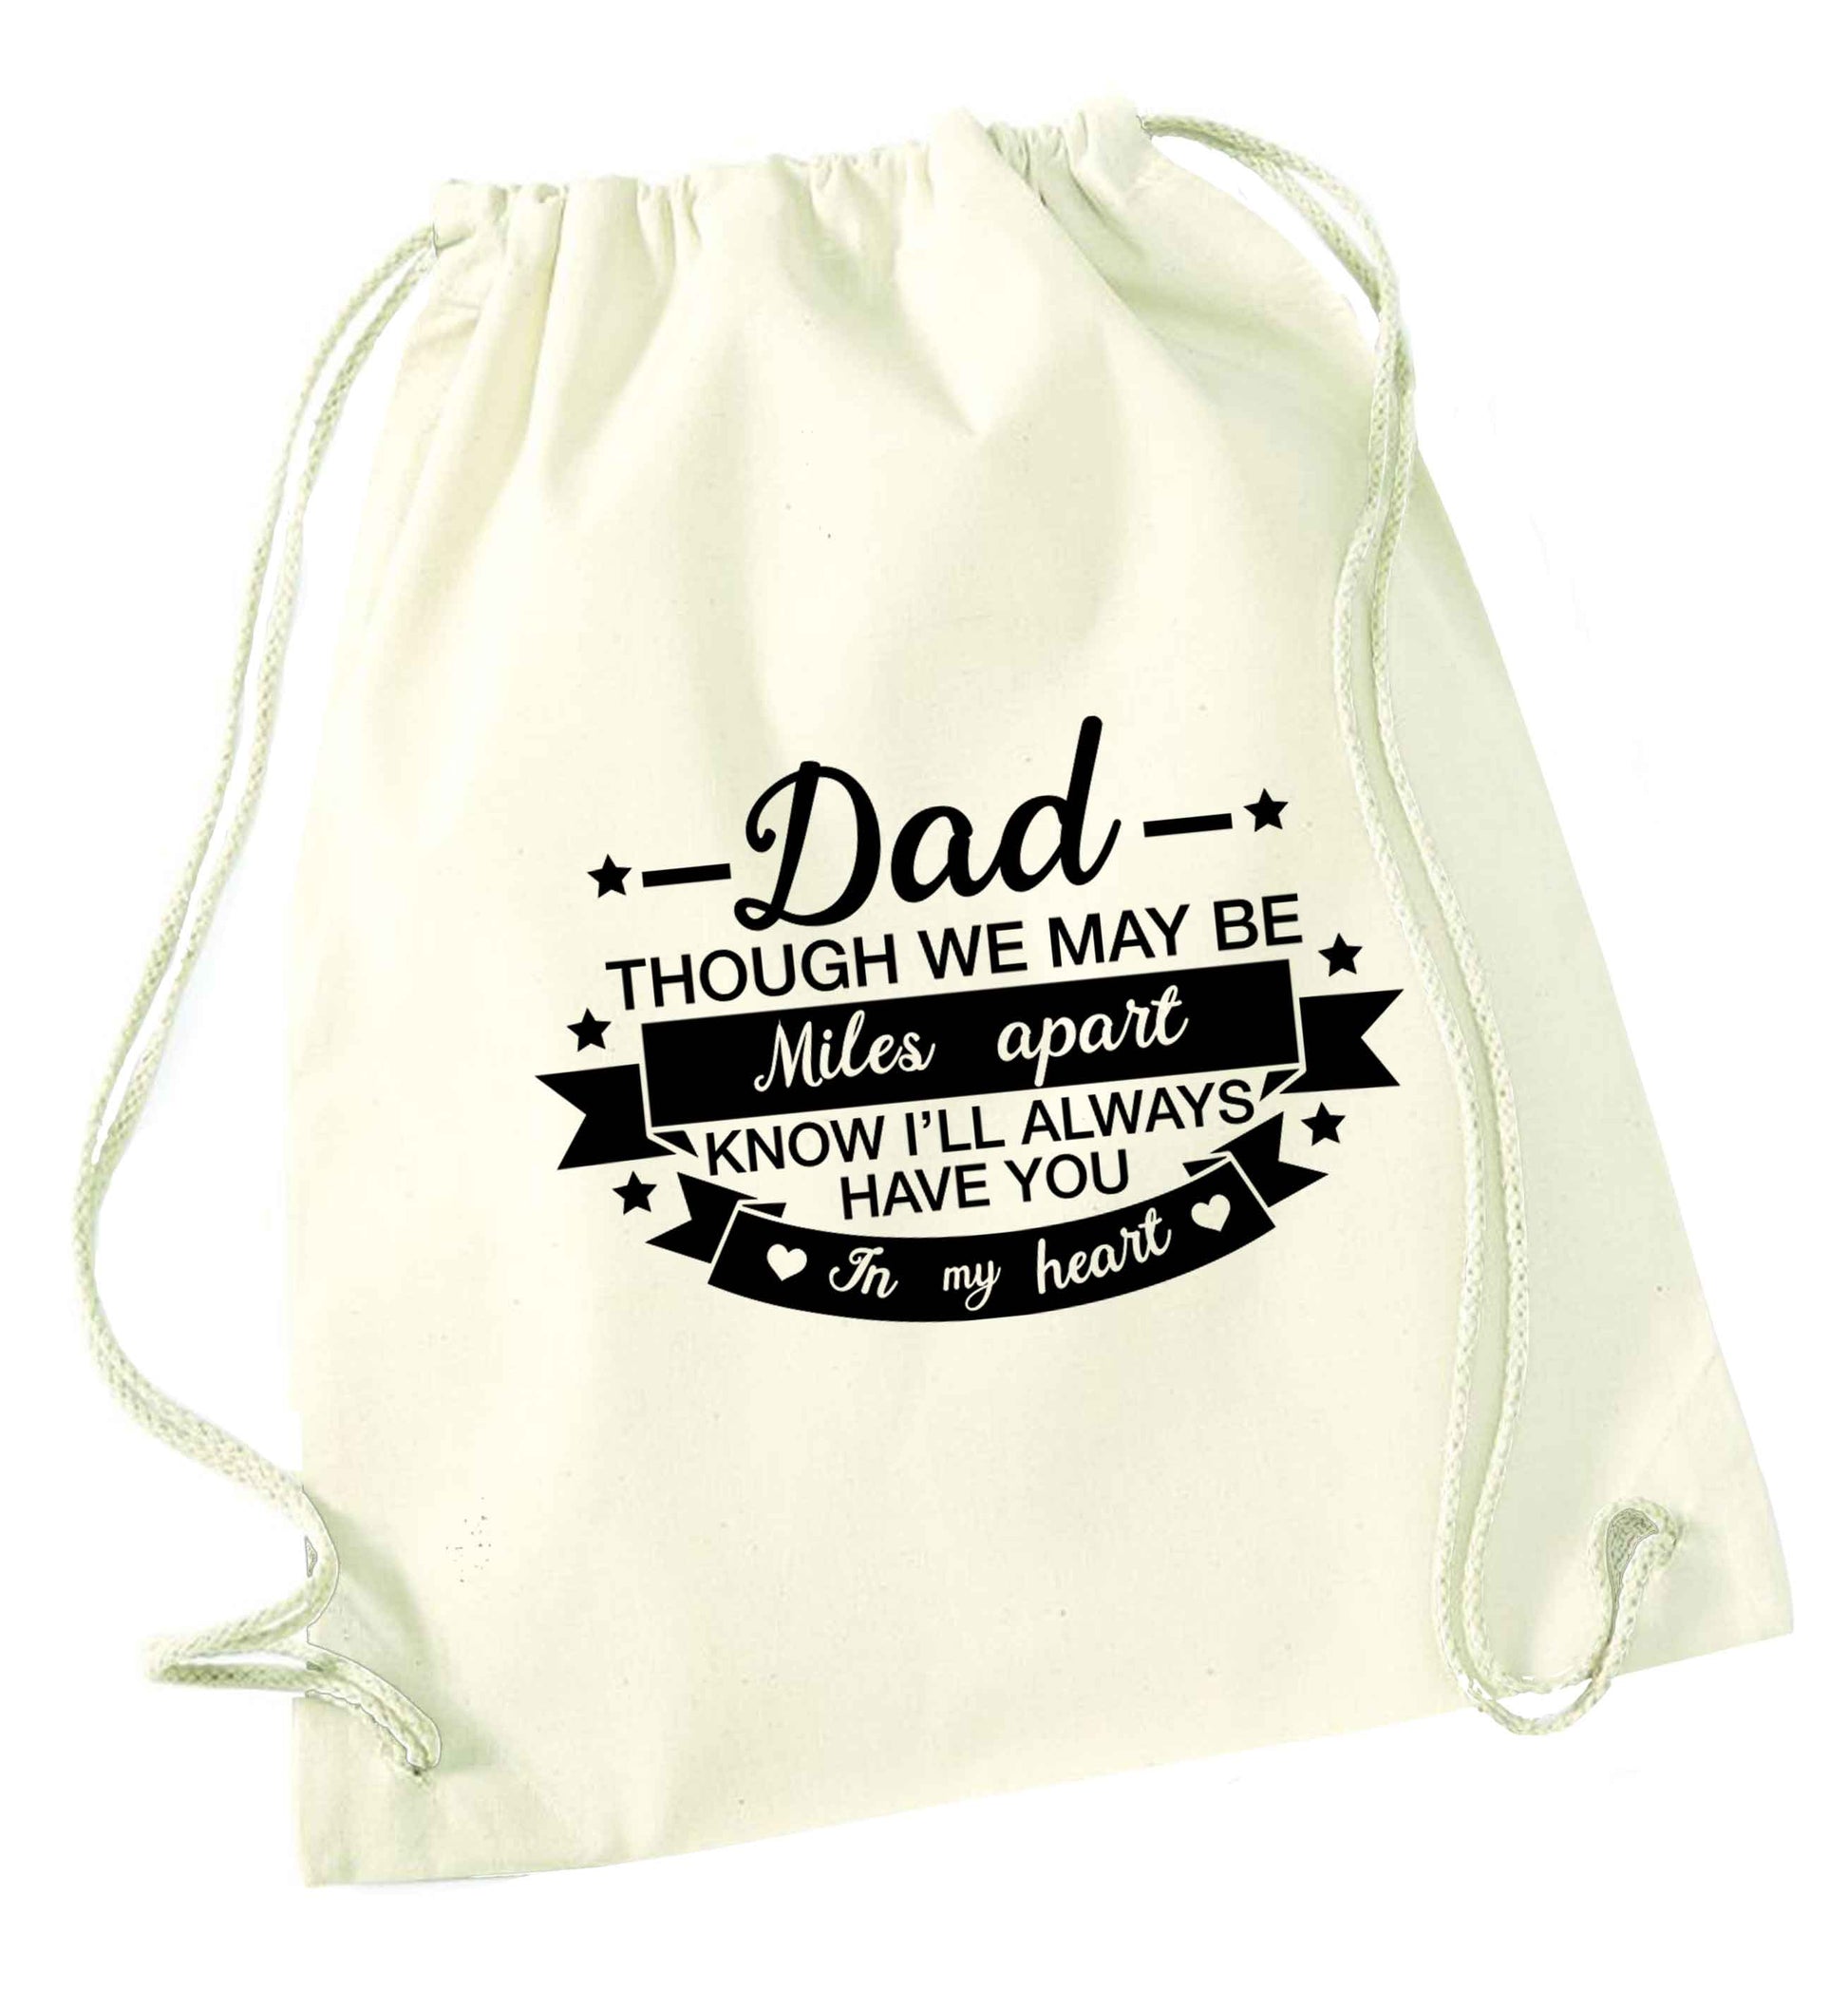 Dad though we are miles apart know I'll always have you in my heart natural drawstring bag